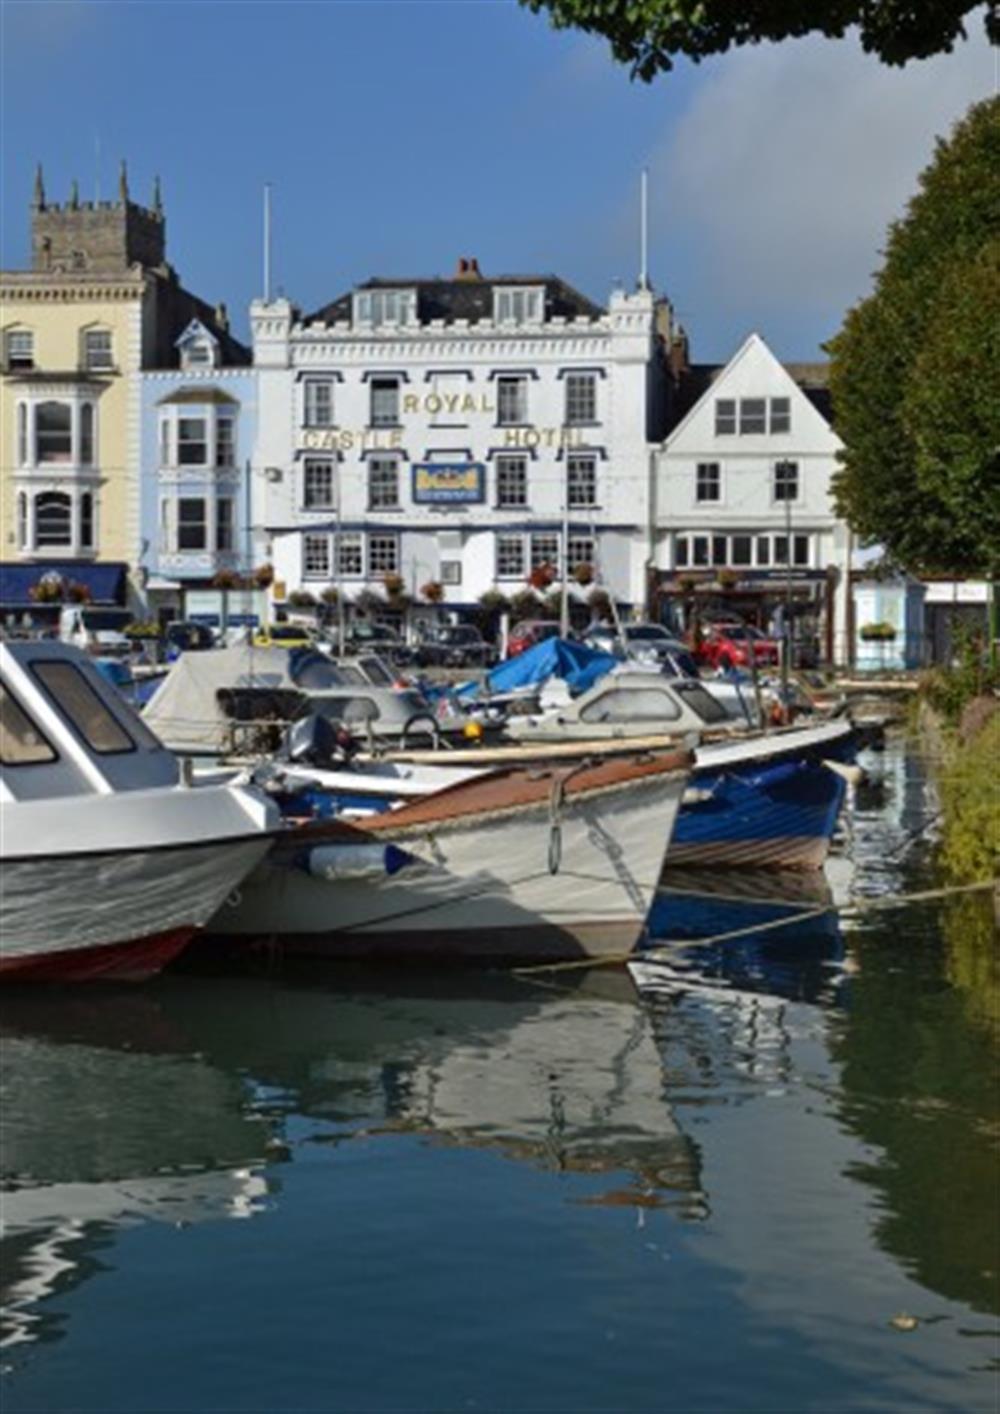 Historic Dartmouth with shops, cinema, and good eateries along with the Royal Naval College and situated on the River Dart. at Orchard View in South Pool